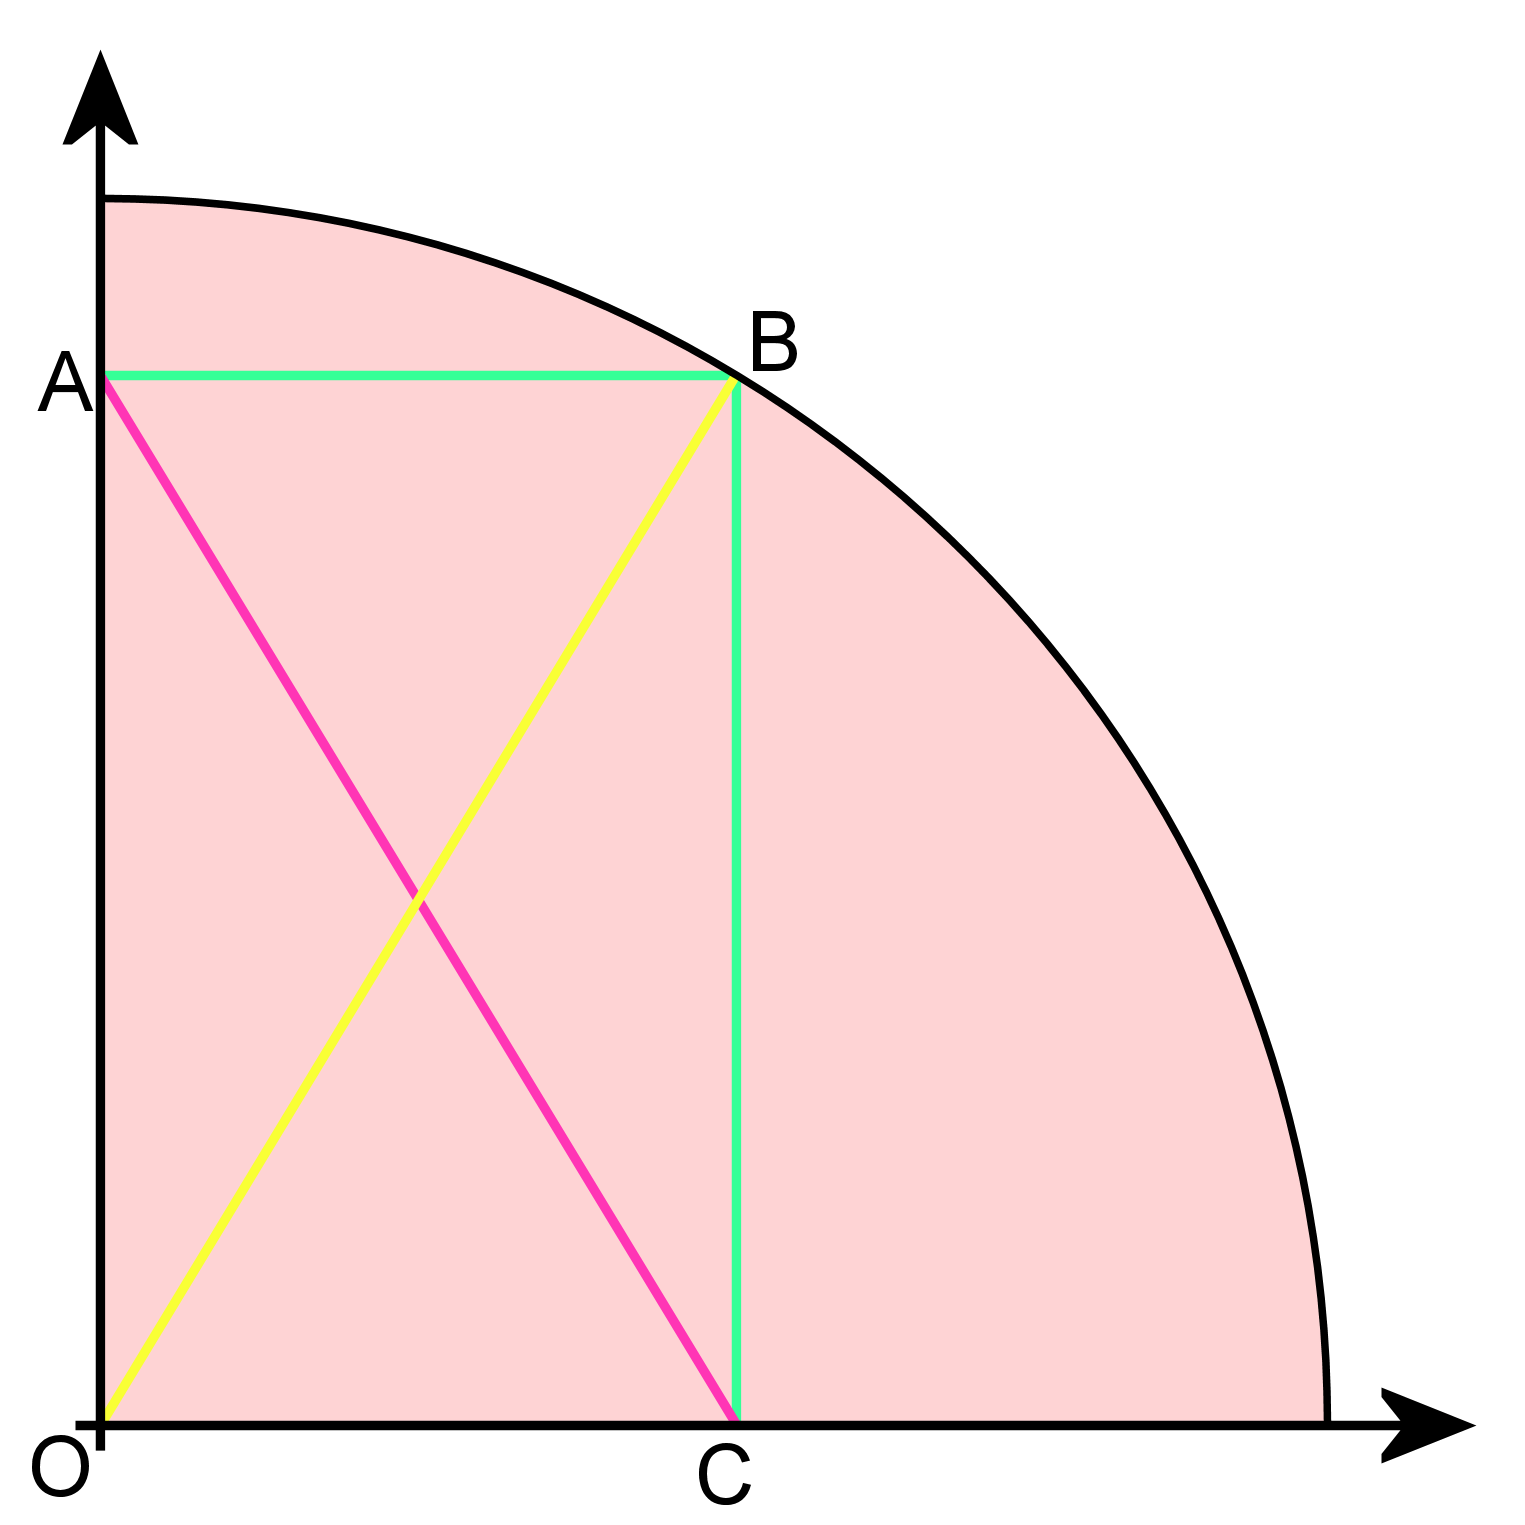 quadrant of a circle radius 'r' with a rectangle touching the perimeter of the circle. What is the length of the line labeled A-C